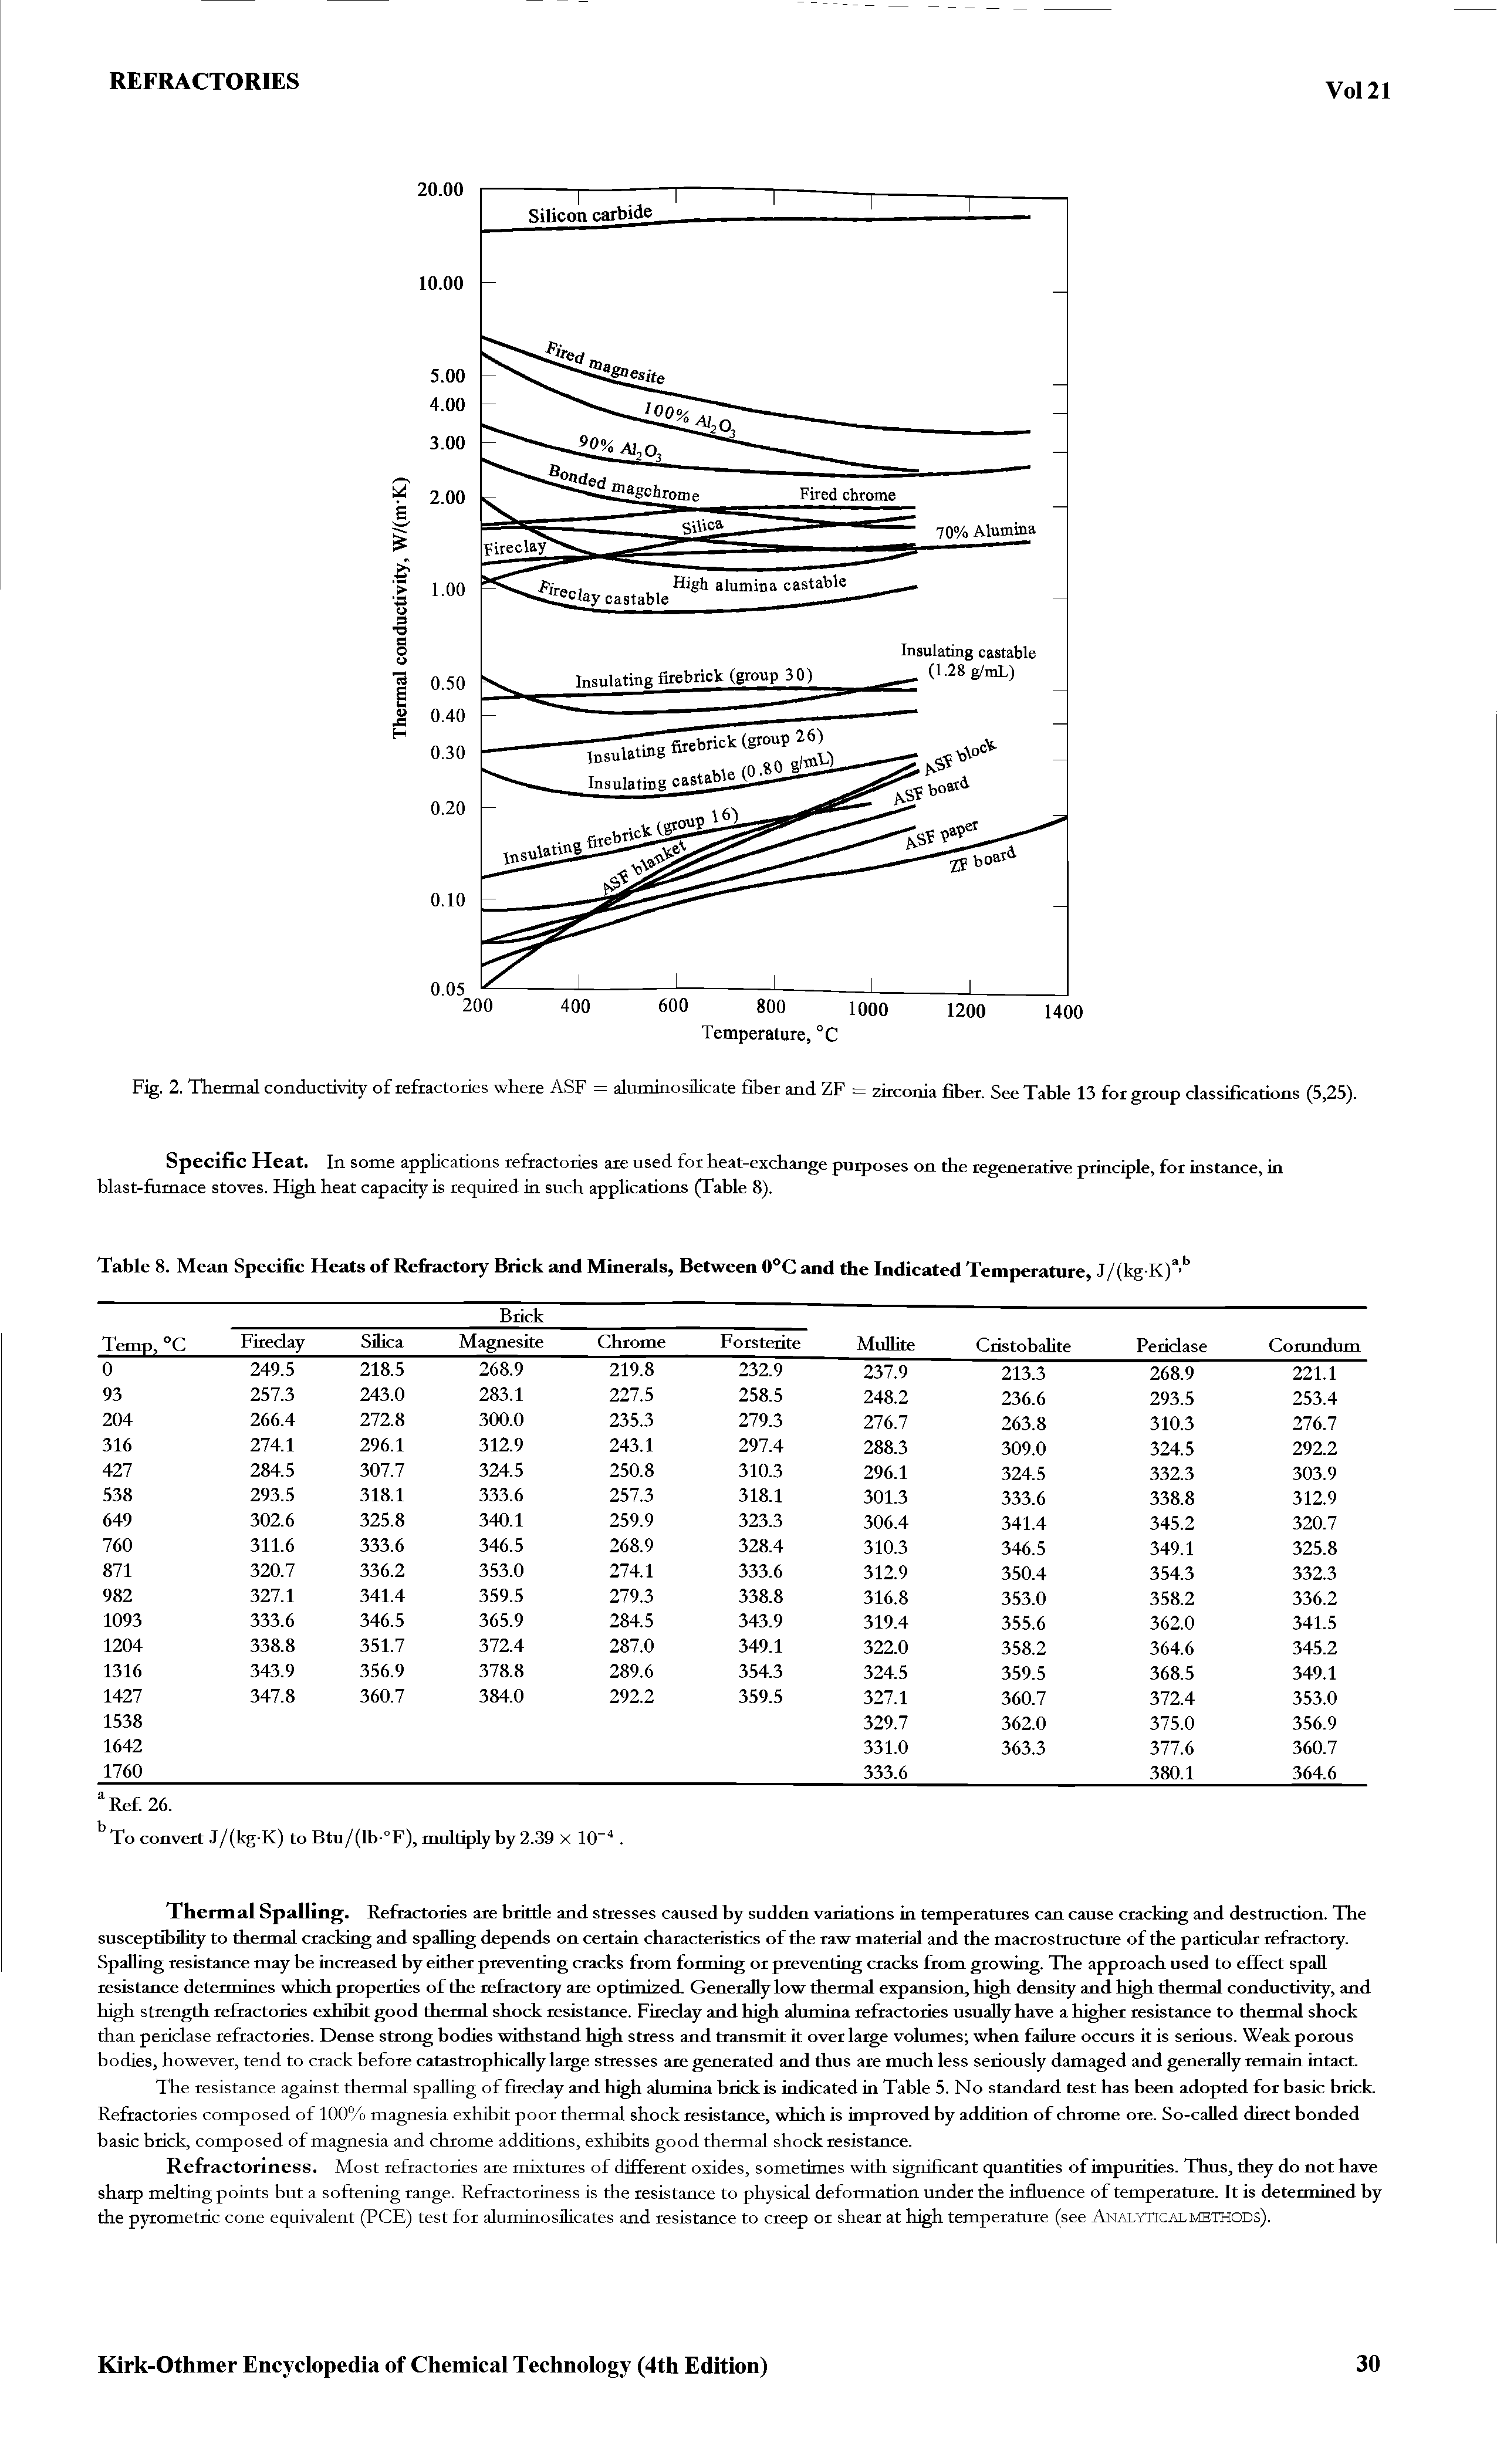 Fig. 2. Thermal conductivity of refractories where ASF = aluminosilicate fiber and ZF = zirconia fiber. See Table 13 for group classifications (5,25).